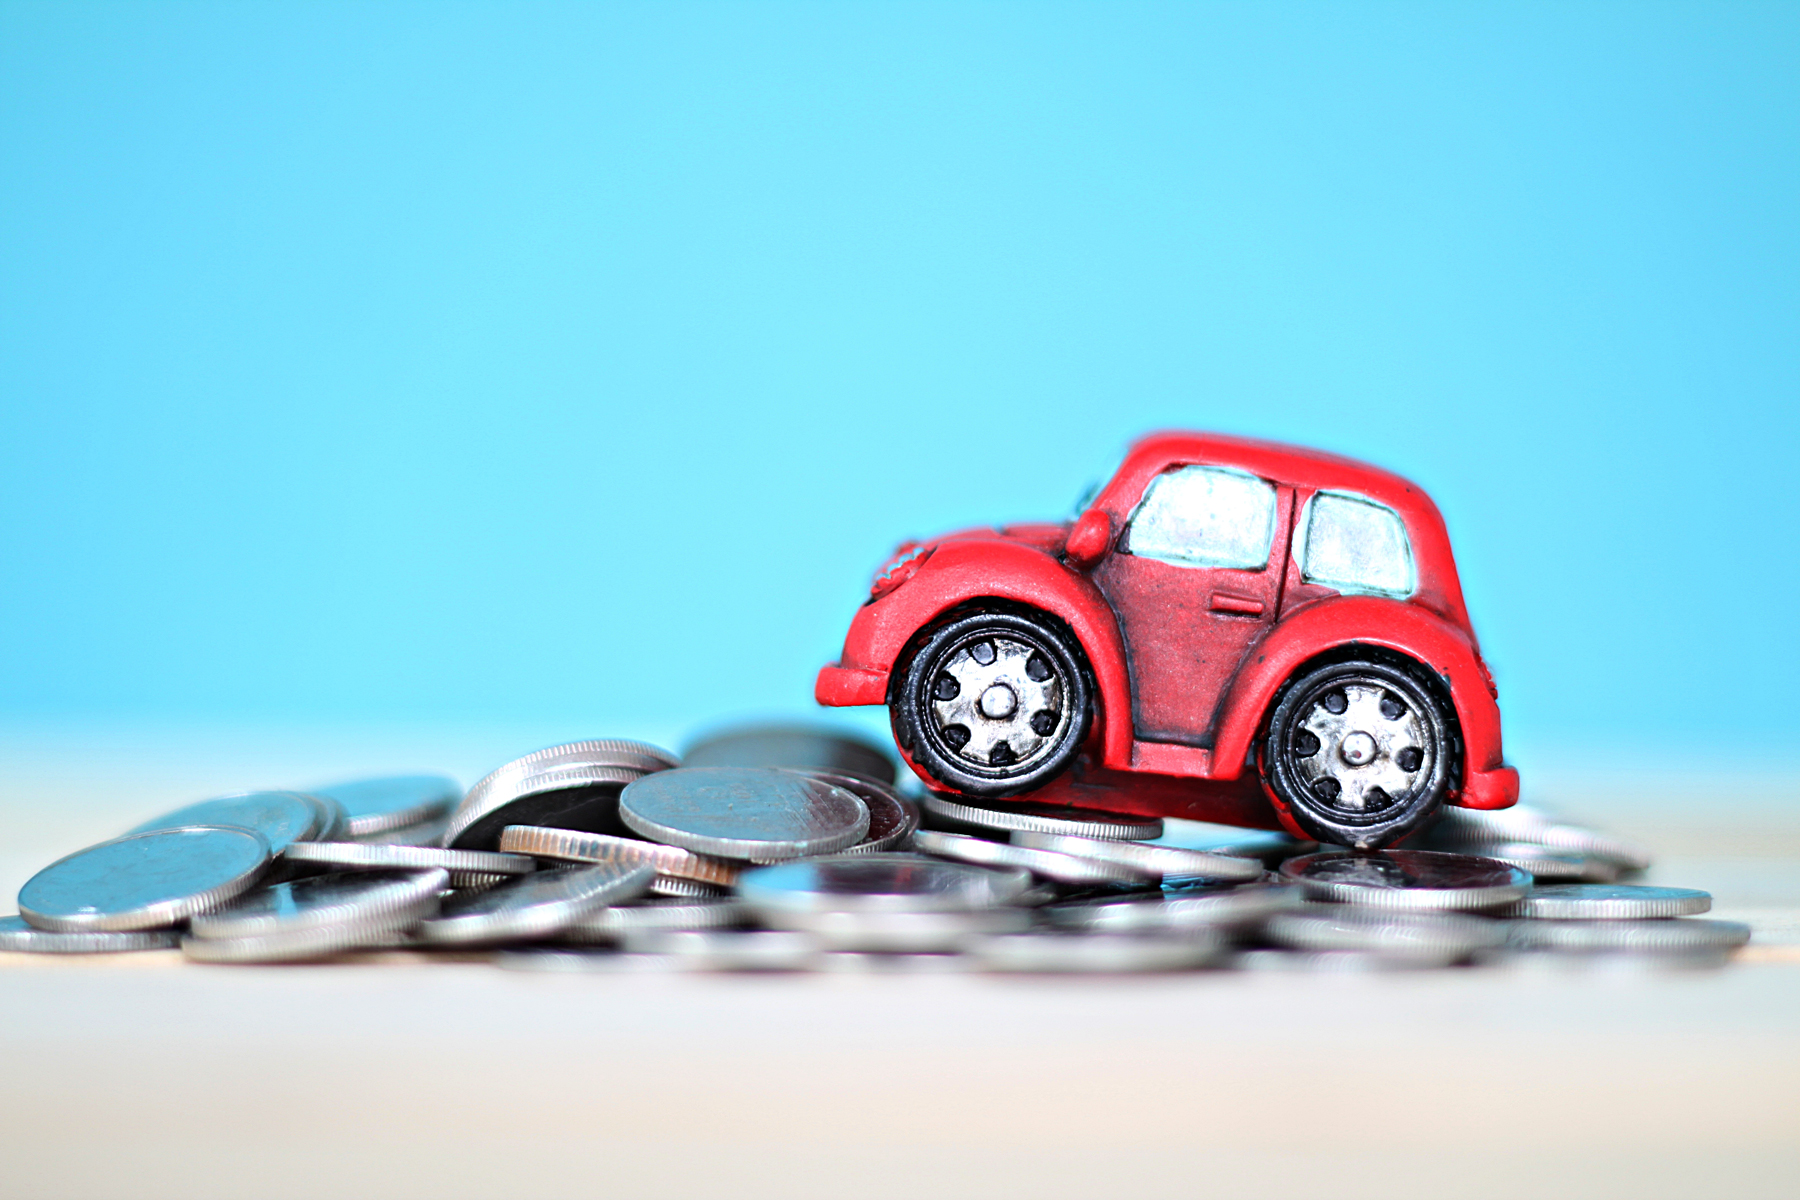 A model car placed on-top of a pile of coins against a blue background